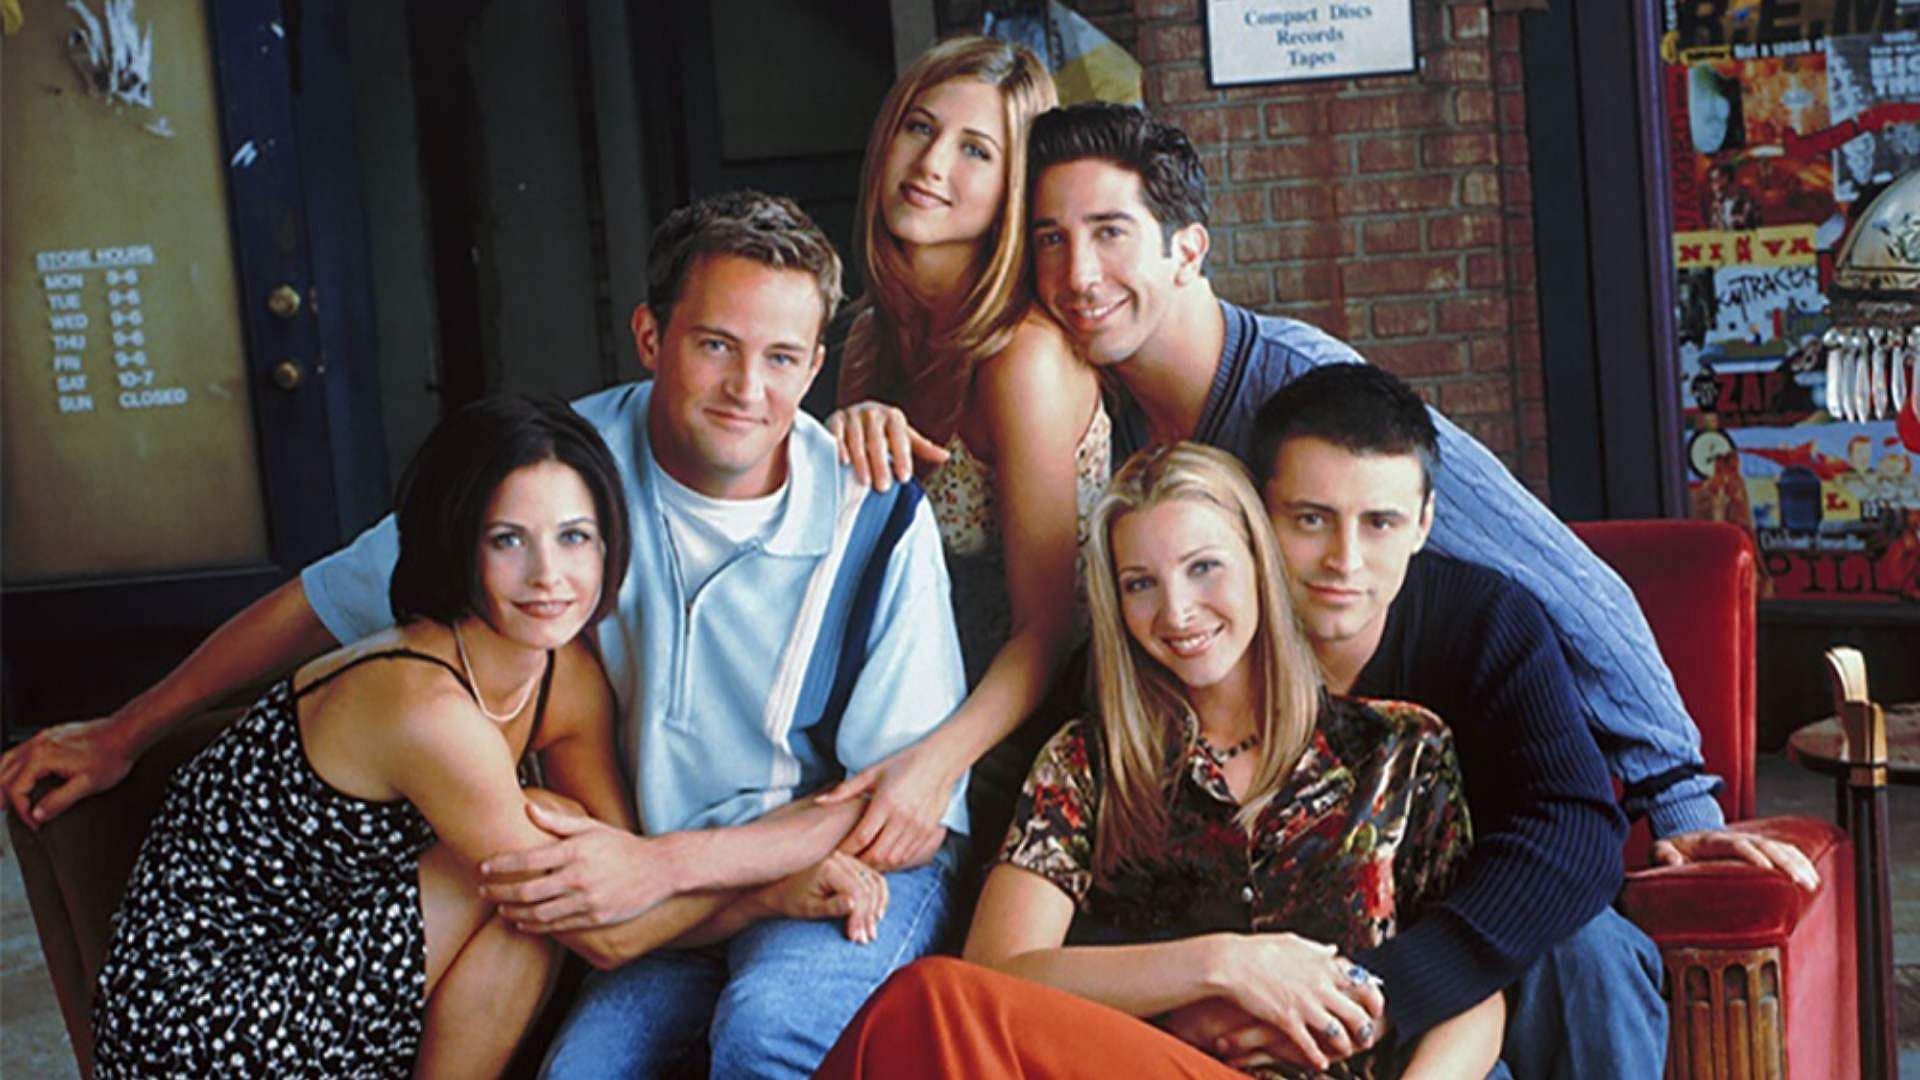 The reunion of the <i>Friends </i>cast has been postponed due to coronavirus restrictions.